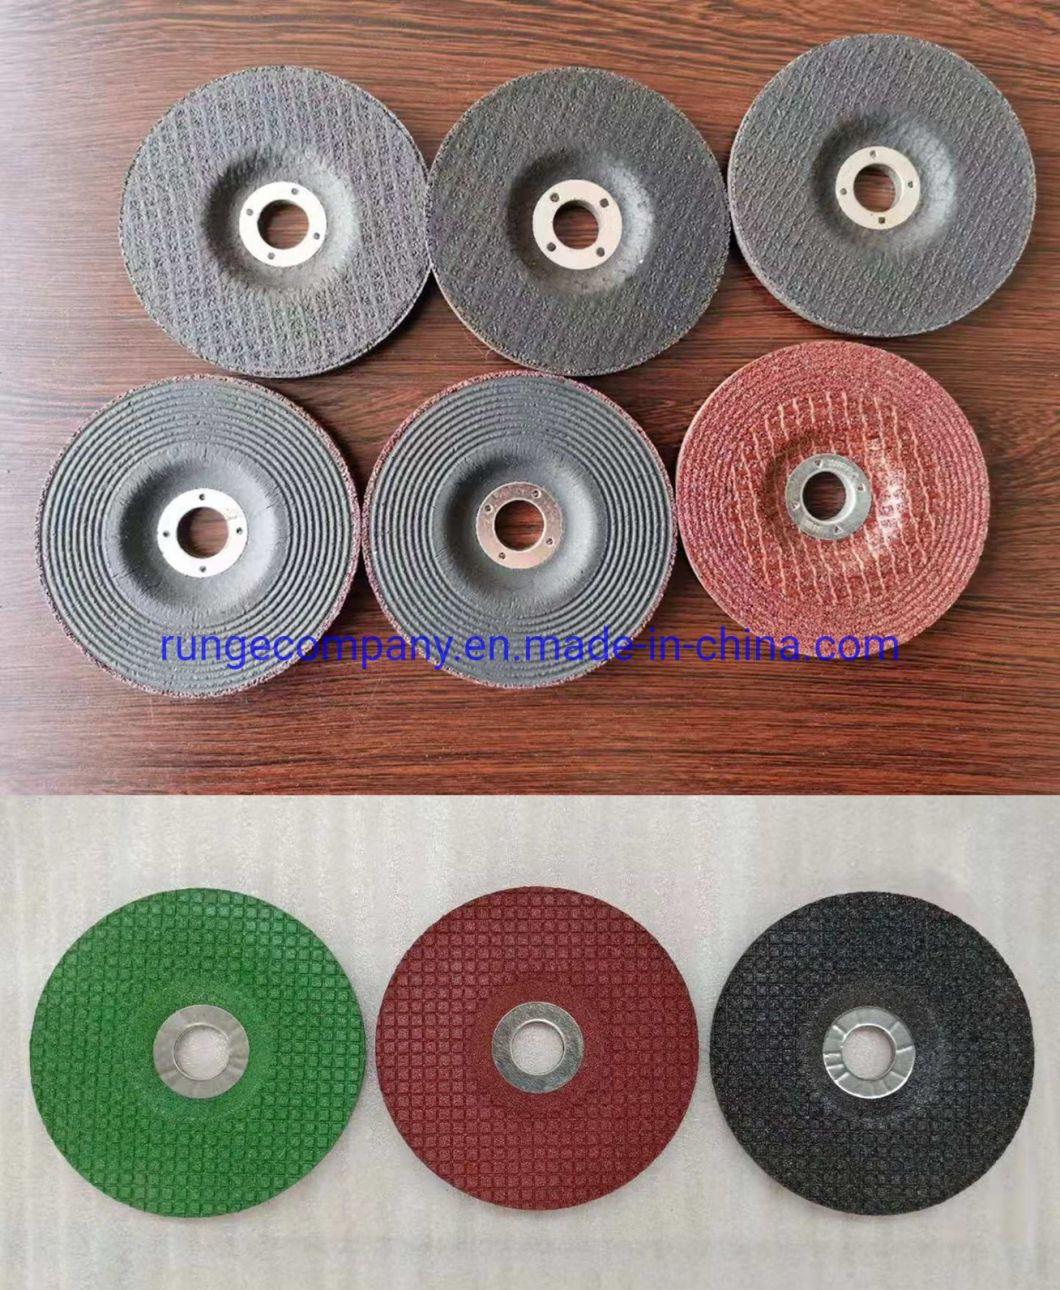 Steel Metal Aluminum Oxide Grinding Disc Wheel Type 27 4"X1/8" for Electric Power Tools Accessories